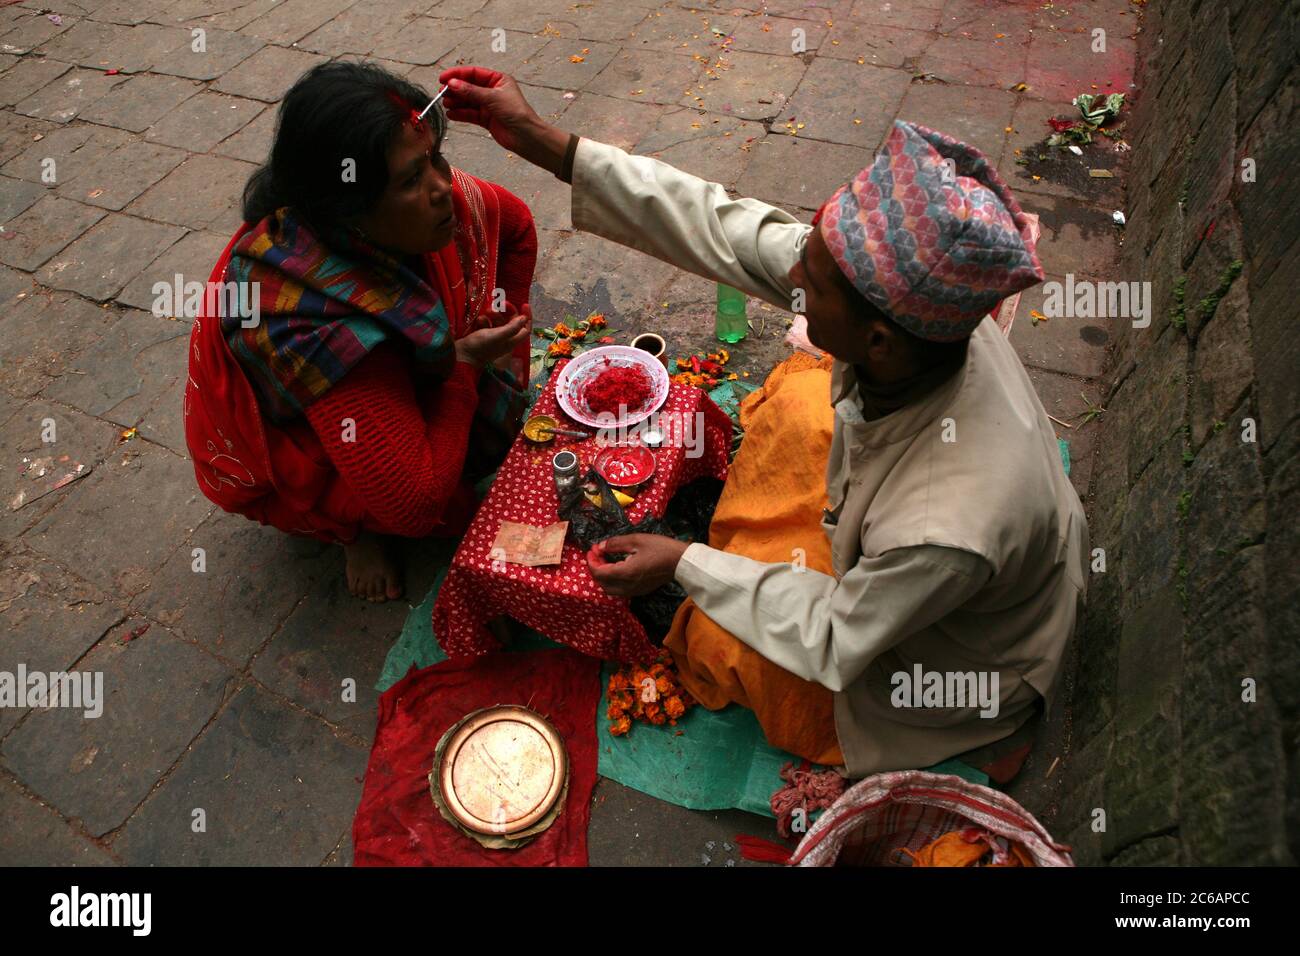 Brahmin applies a tilaka mark on the forehead of a woman next to the entrance to the Dakshinkali Temple near Kathmandu, Nepal. One of the major Hindu temples in Nepal dedicated to the goddess Kali is known for its animal sacrifices which take place in the main sanctuary. Stock Photo